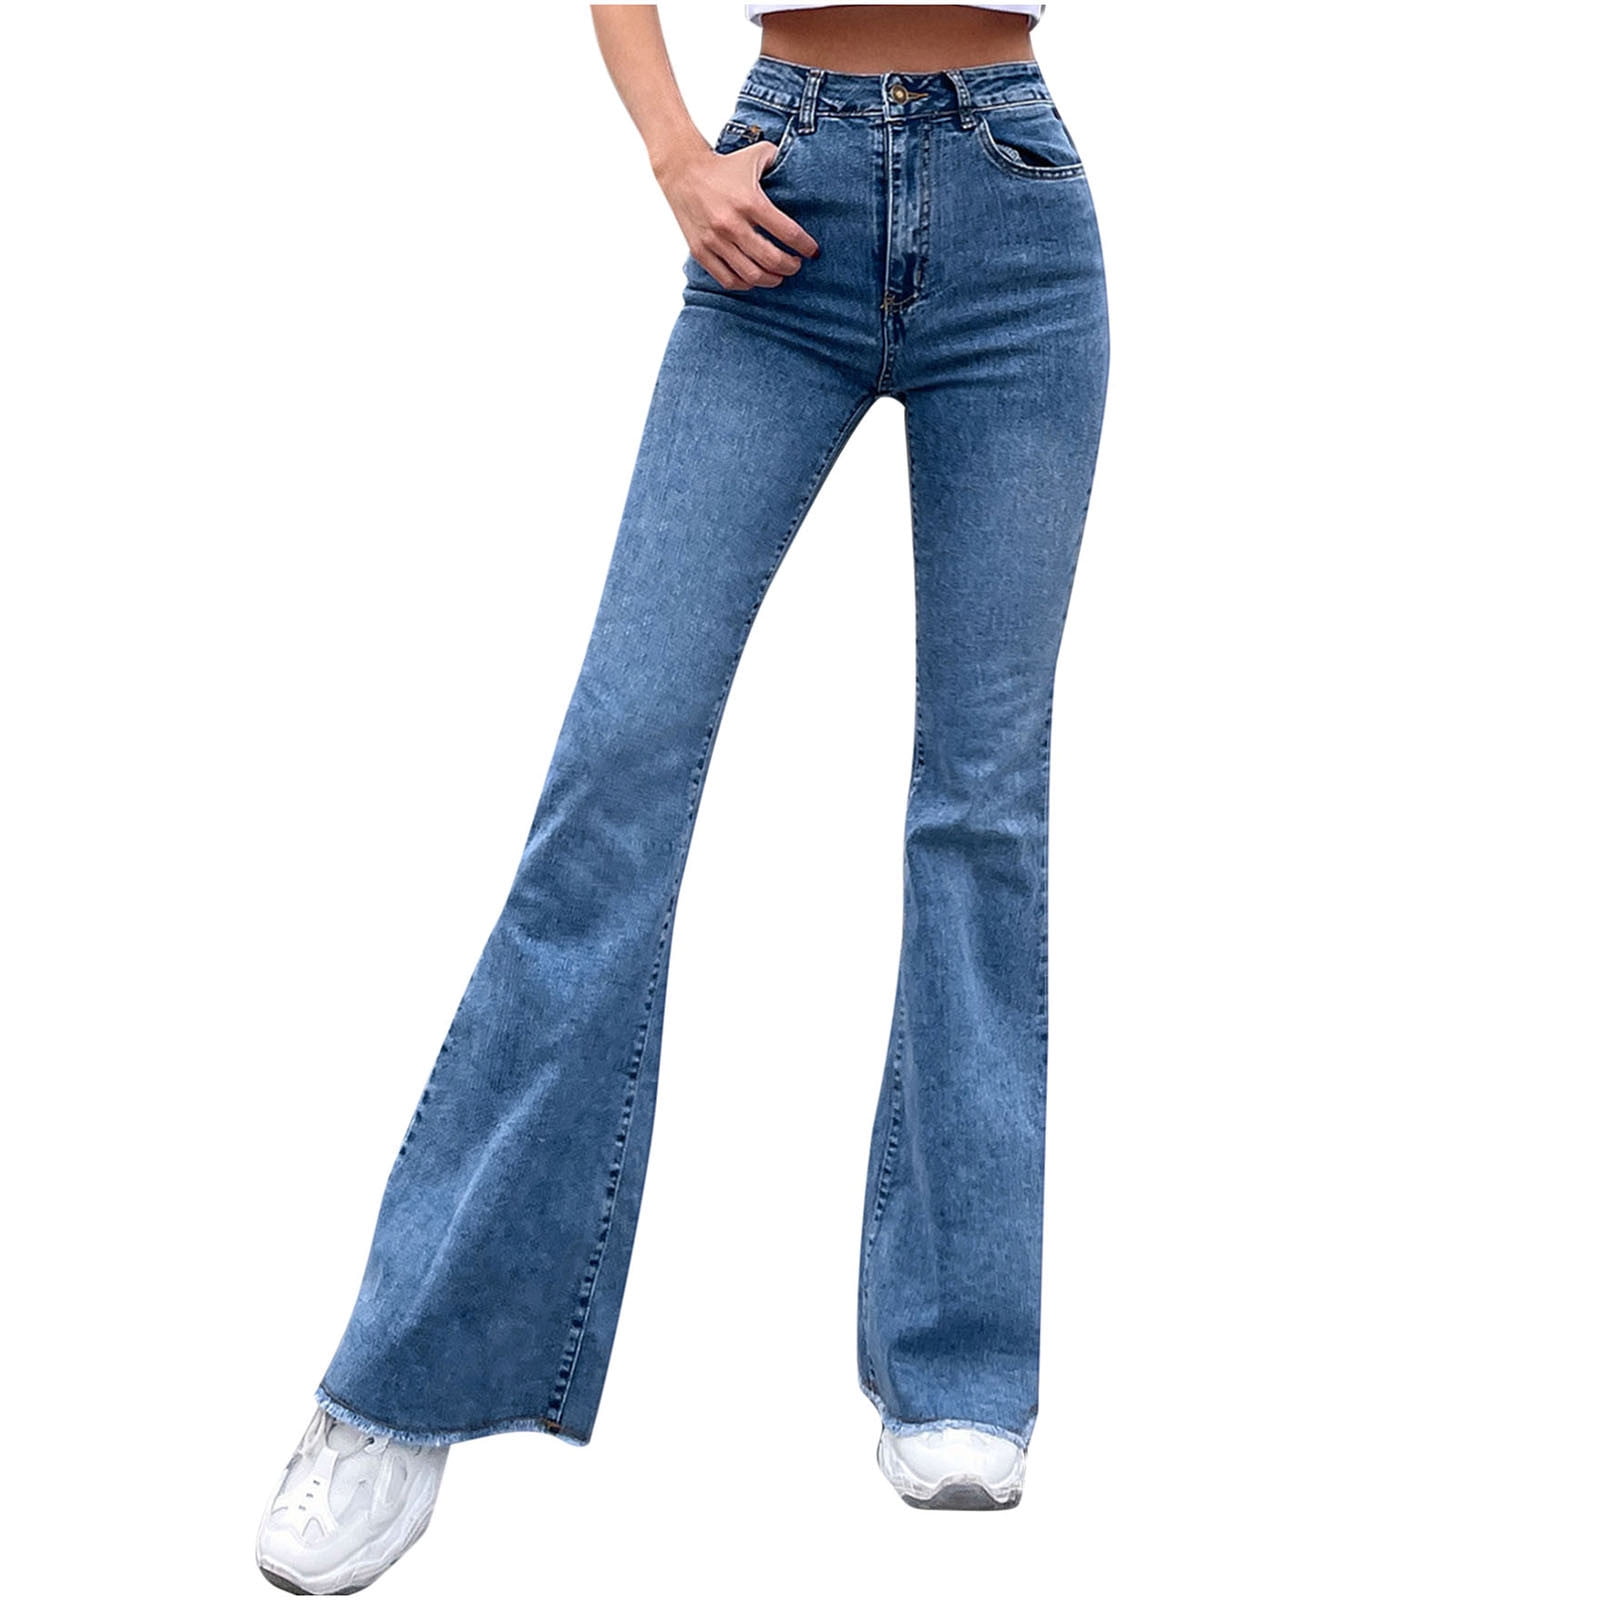 Womens Bell Bottom Jeans High Waist Washed Raw Hem Stretchy Bootcut Denim  Pants Casual Distressed Flare Trousers